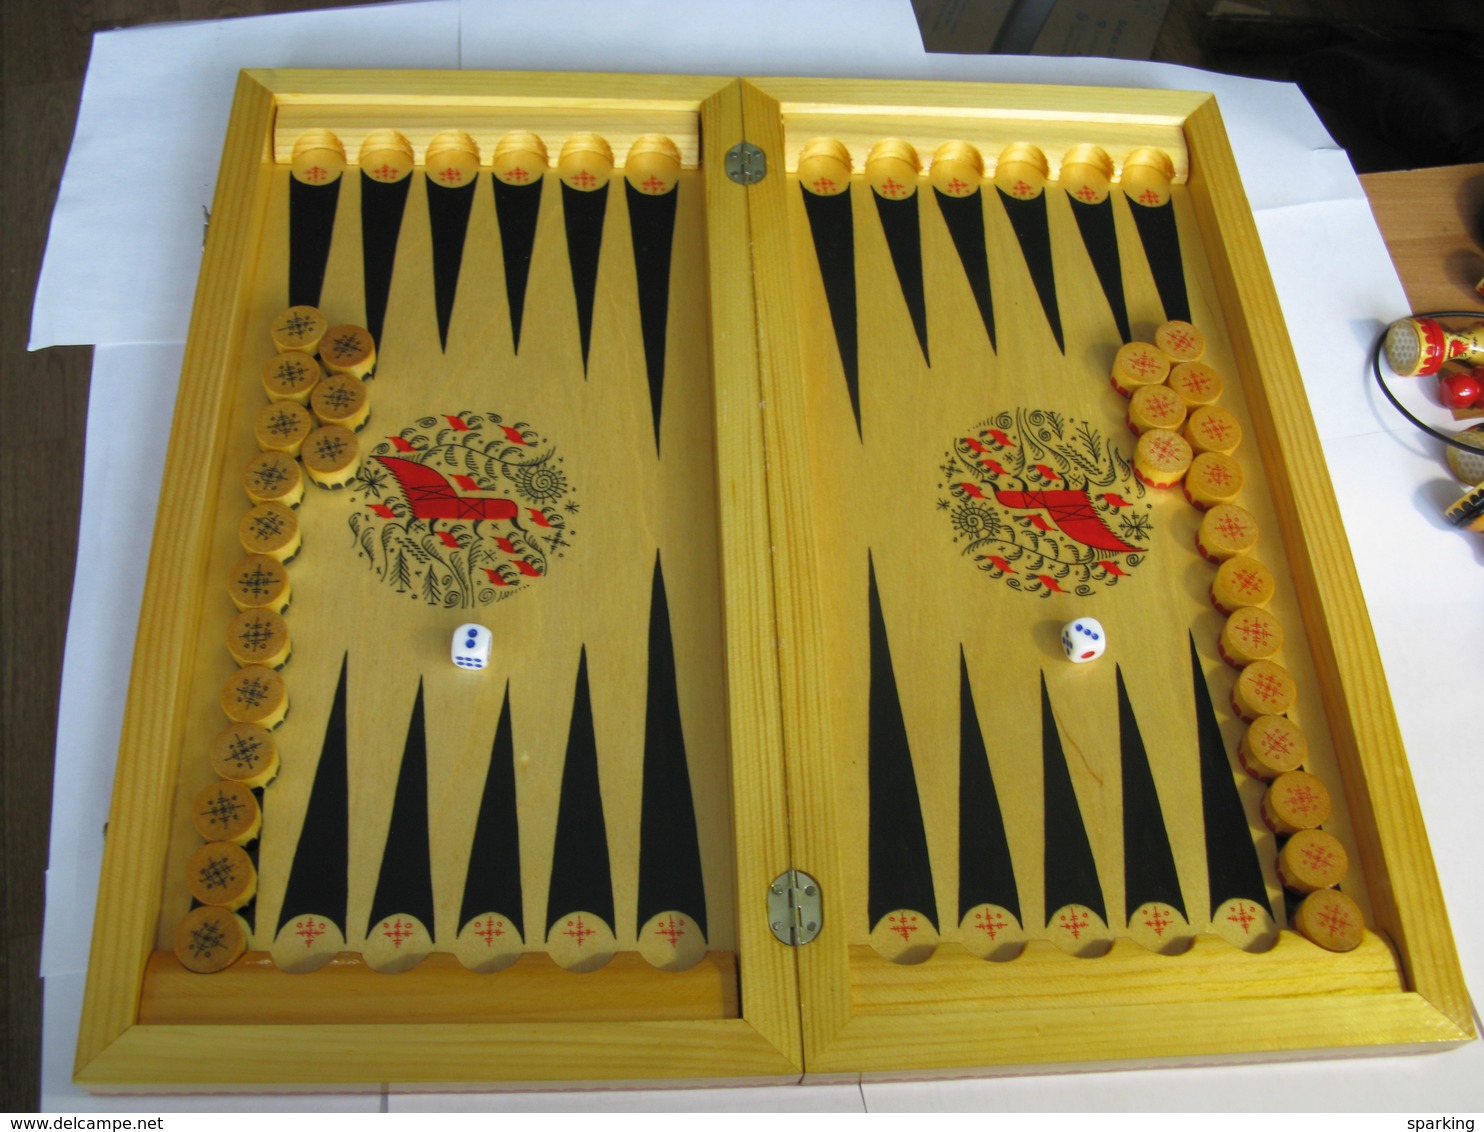 Chess + checkers / backgammon, exclusive, wooden, carved (set), hand-painted in the style of Mezen painting. 1980-ies, S